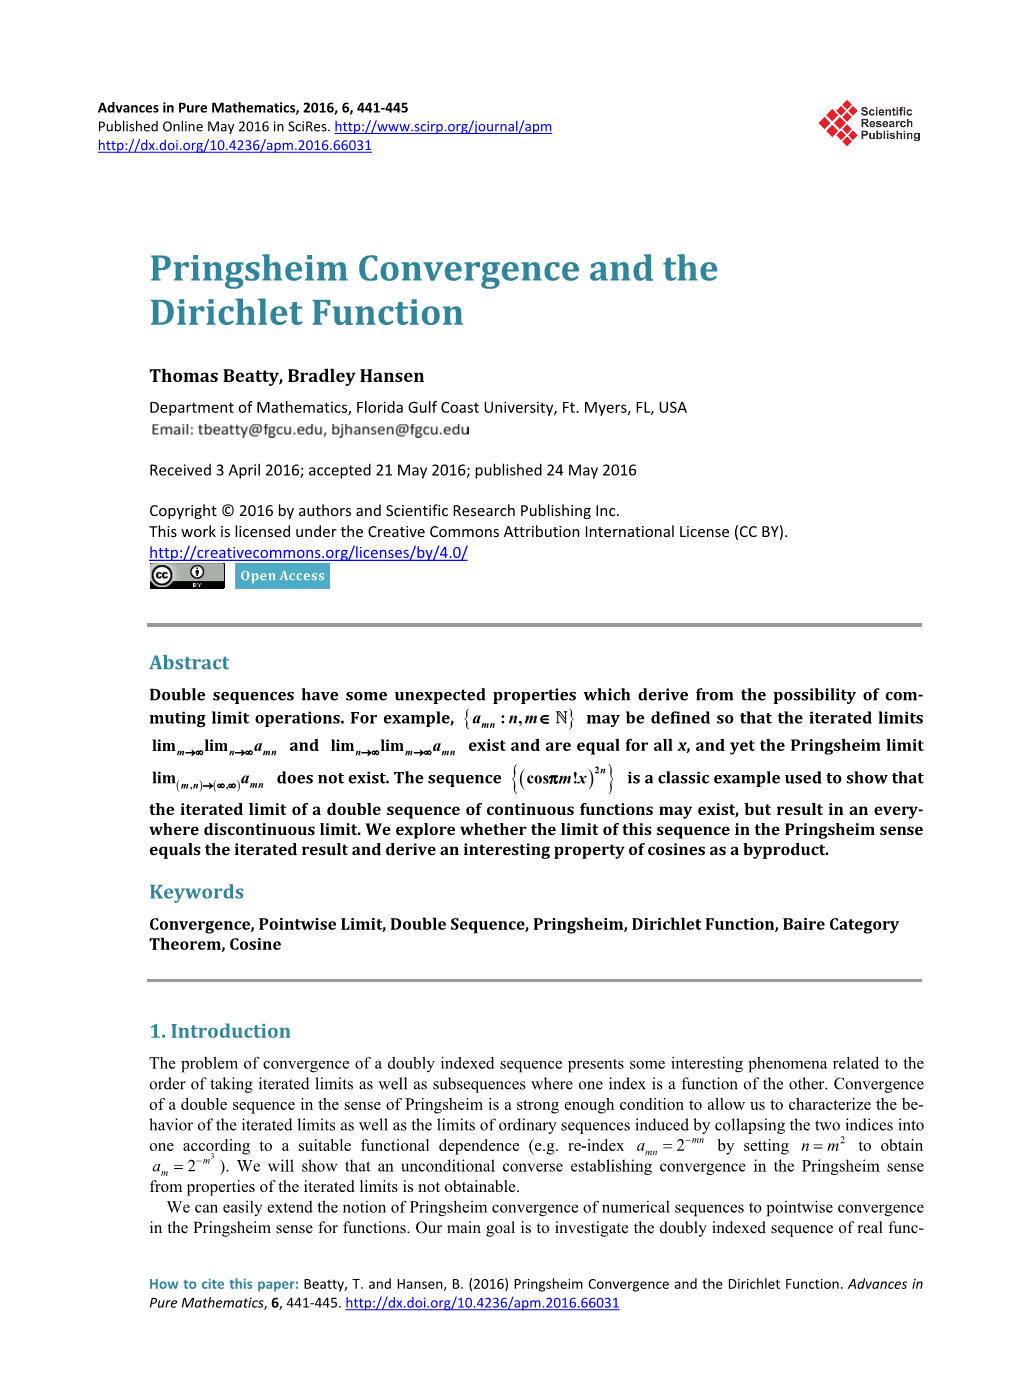 Pringsheim Convergence and the Dirichlet Function